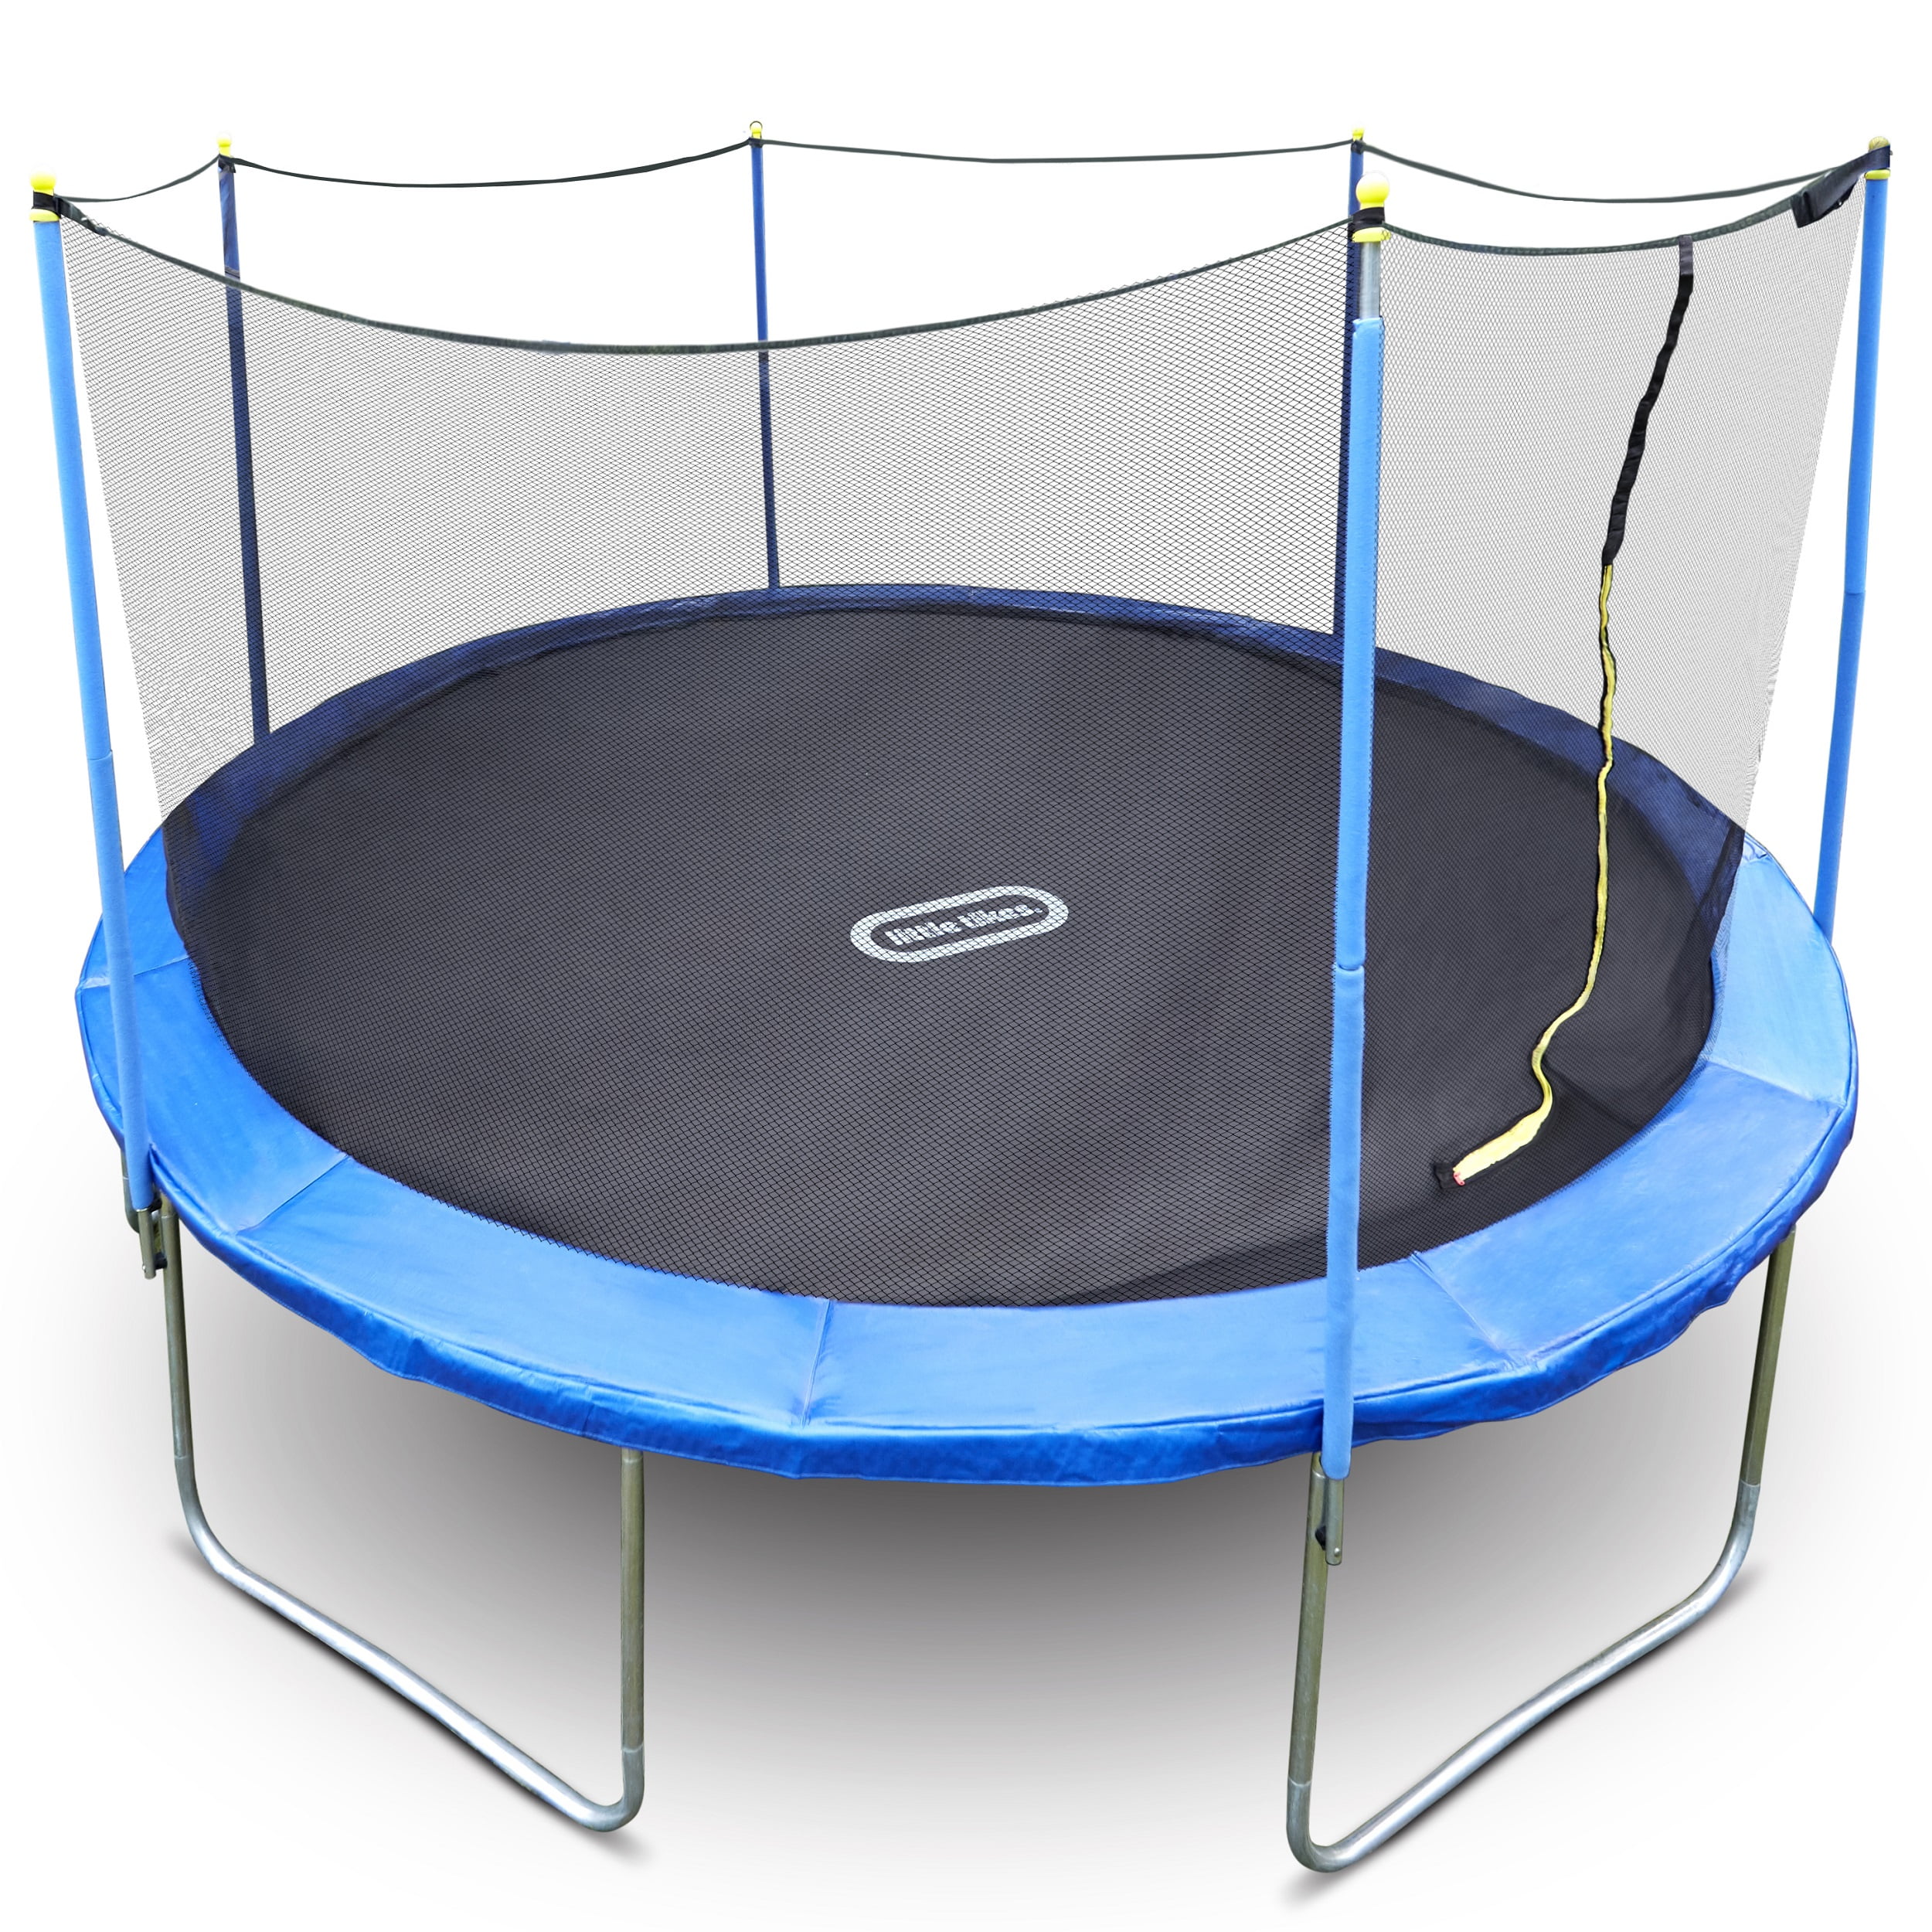 Little Tikes Mega 15-foot Trampoline with Safety Net